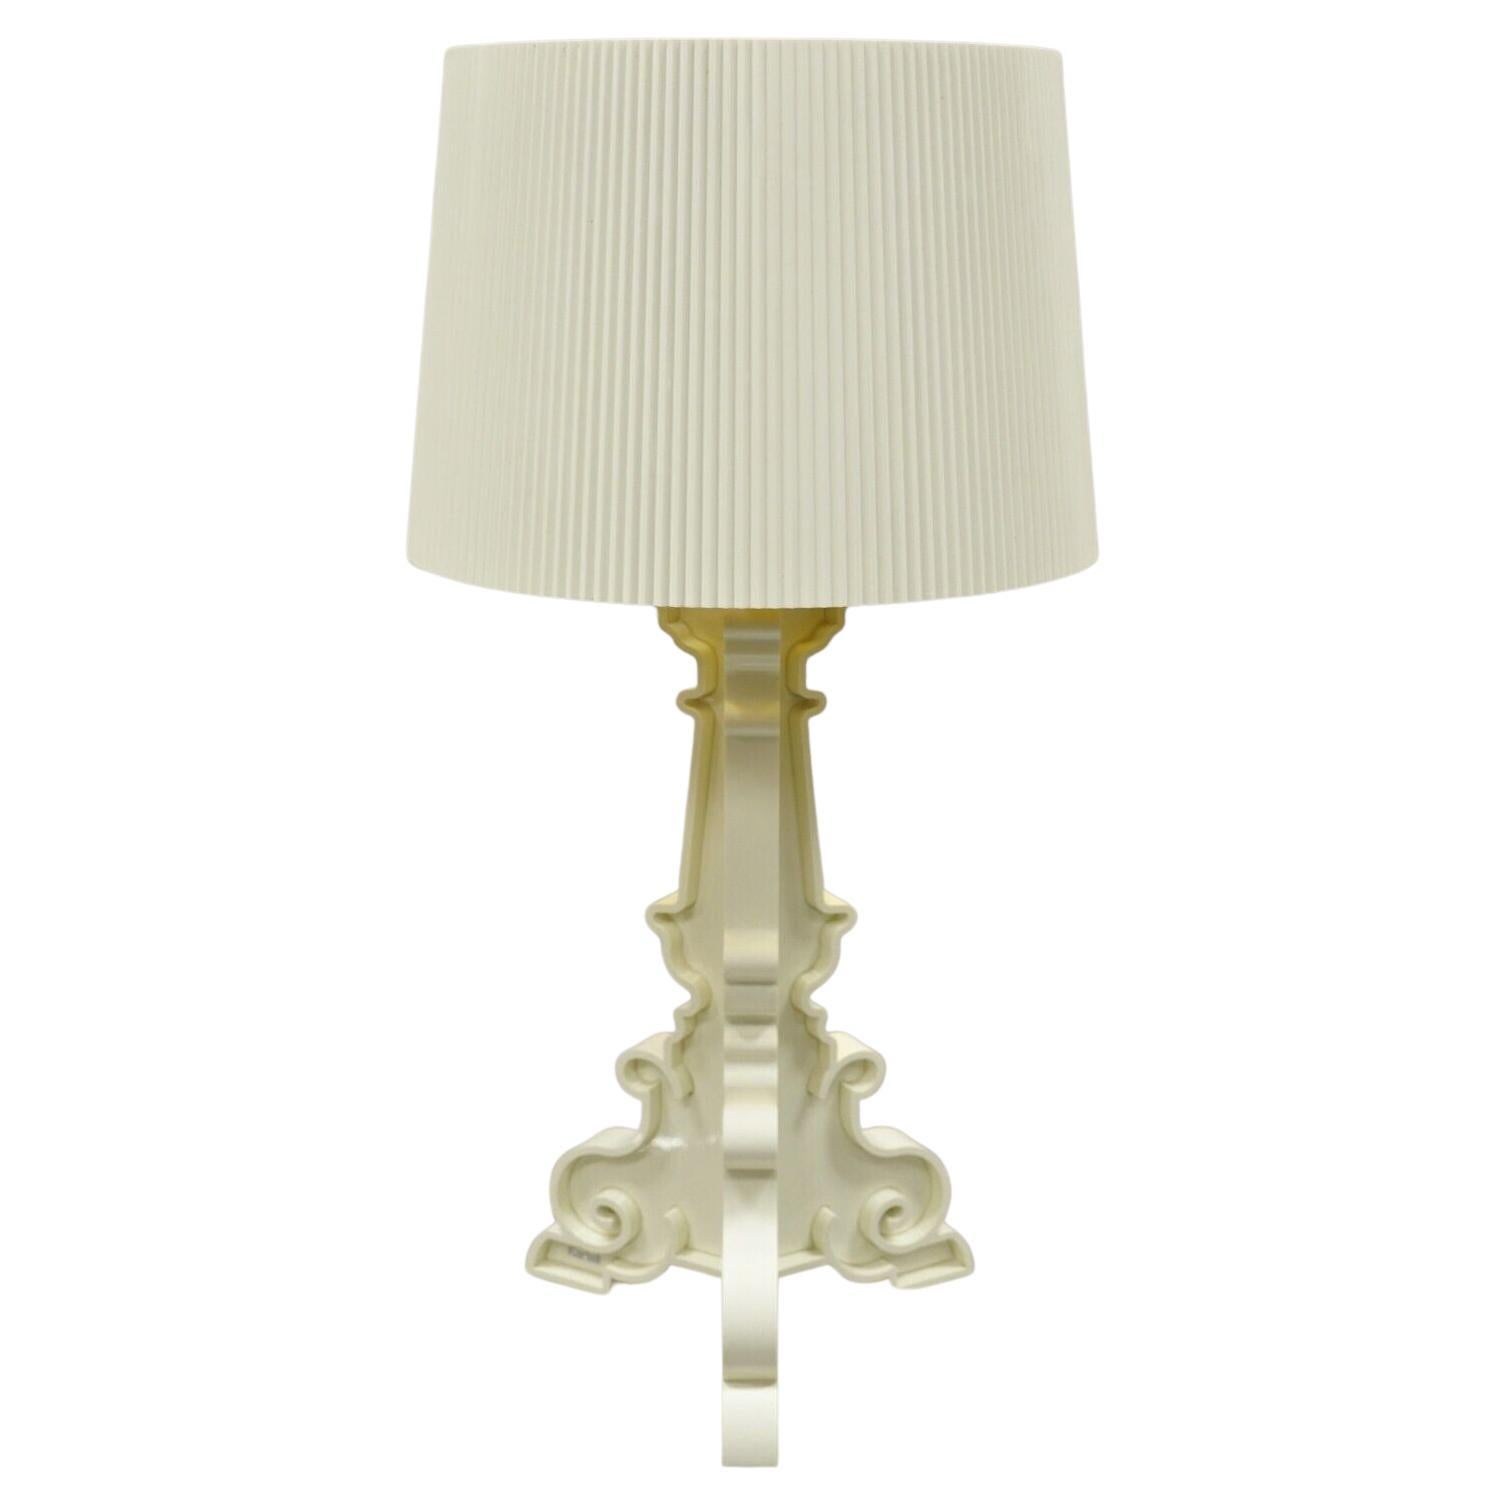 Kartell Ferruccio Laviani Bourgie White Baroque Table Lamp with Shade For Sale